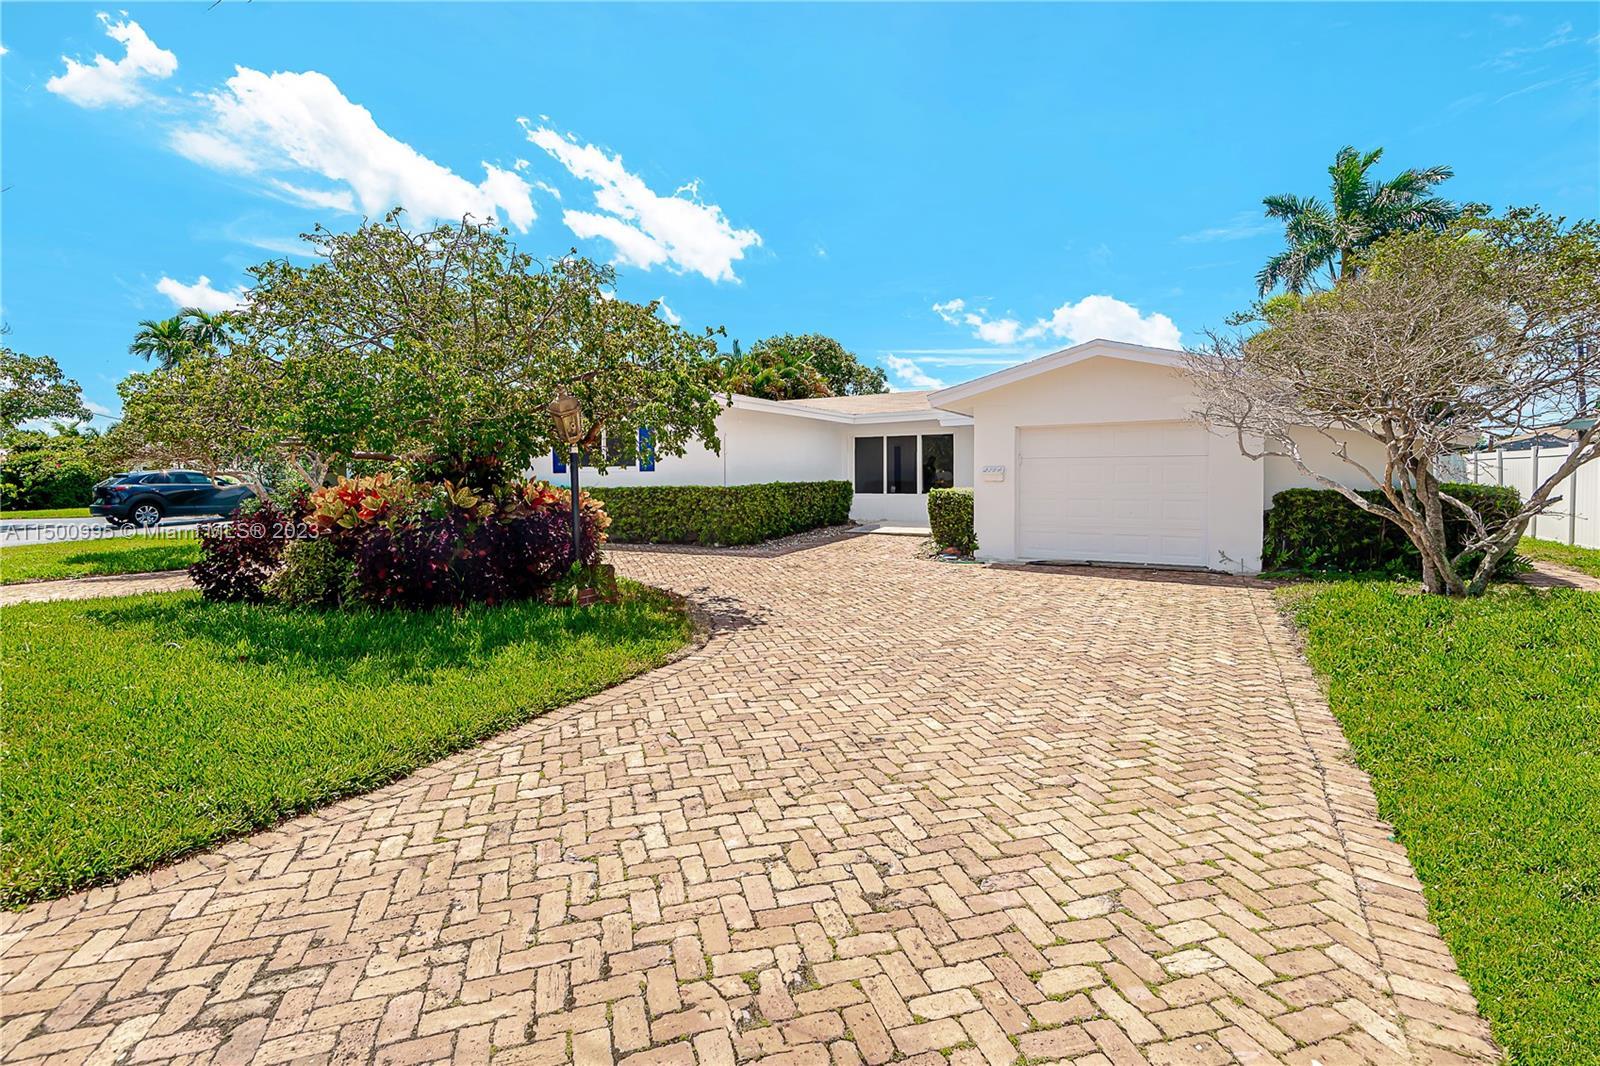 Located within the prestigious enclave of Lighthouse Point, meticulously remodeled with permits, 4 b